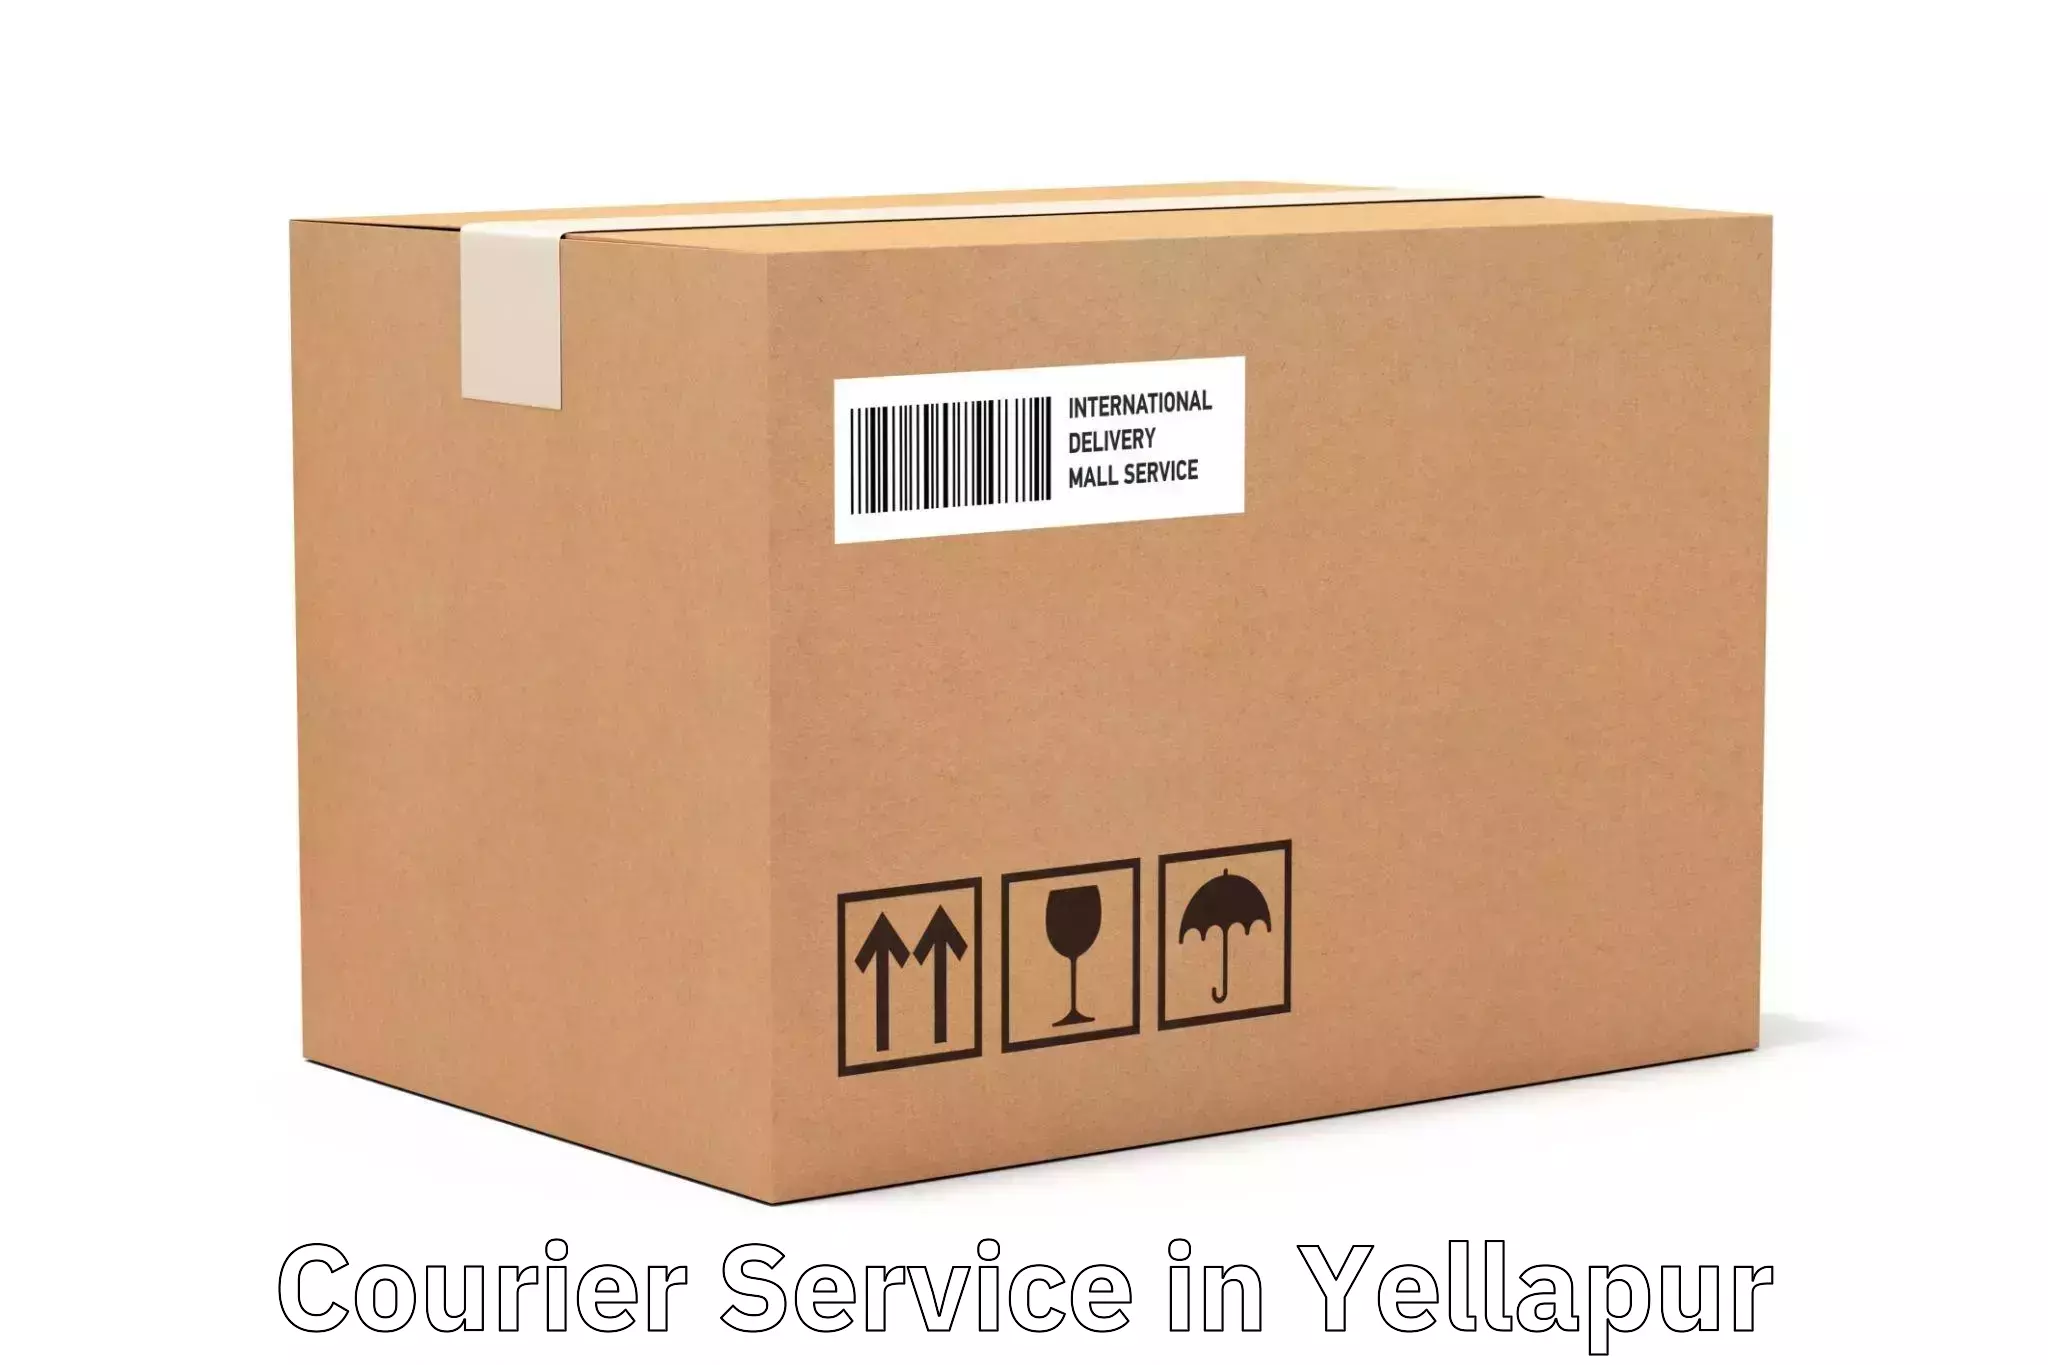 Overnight delivery services in Yellapur